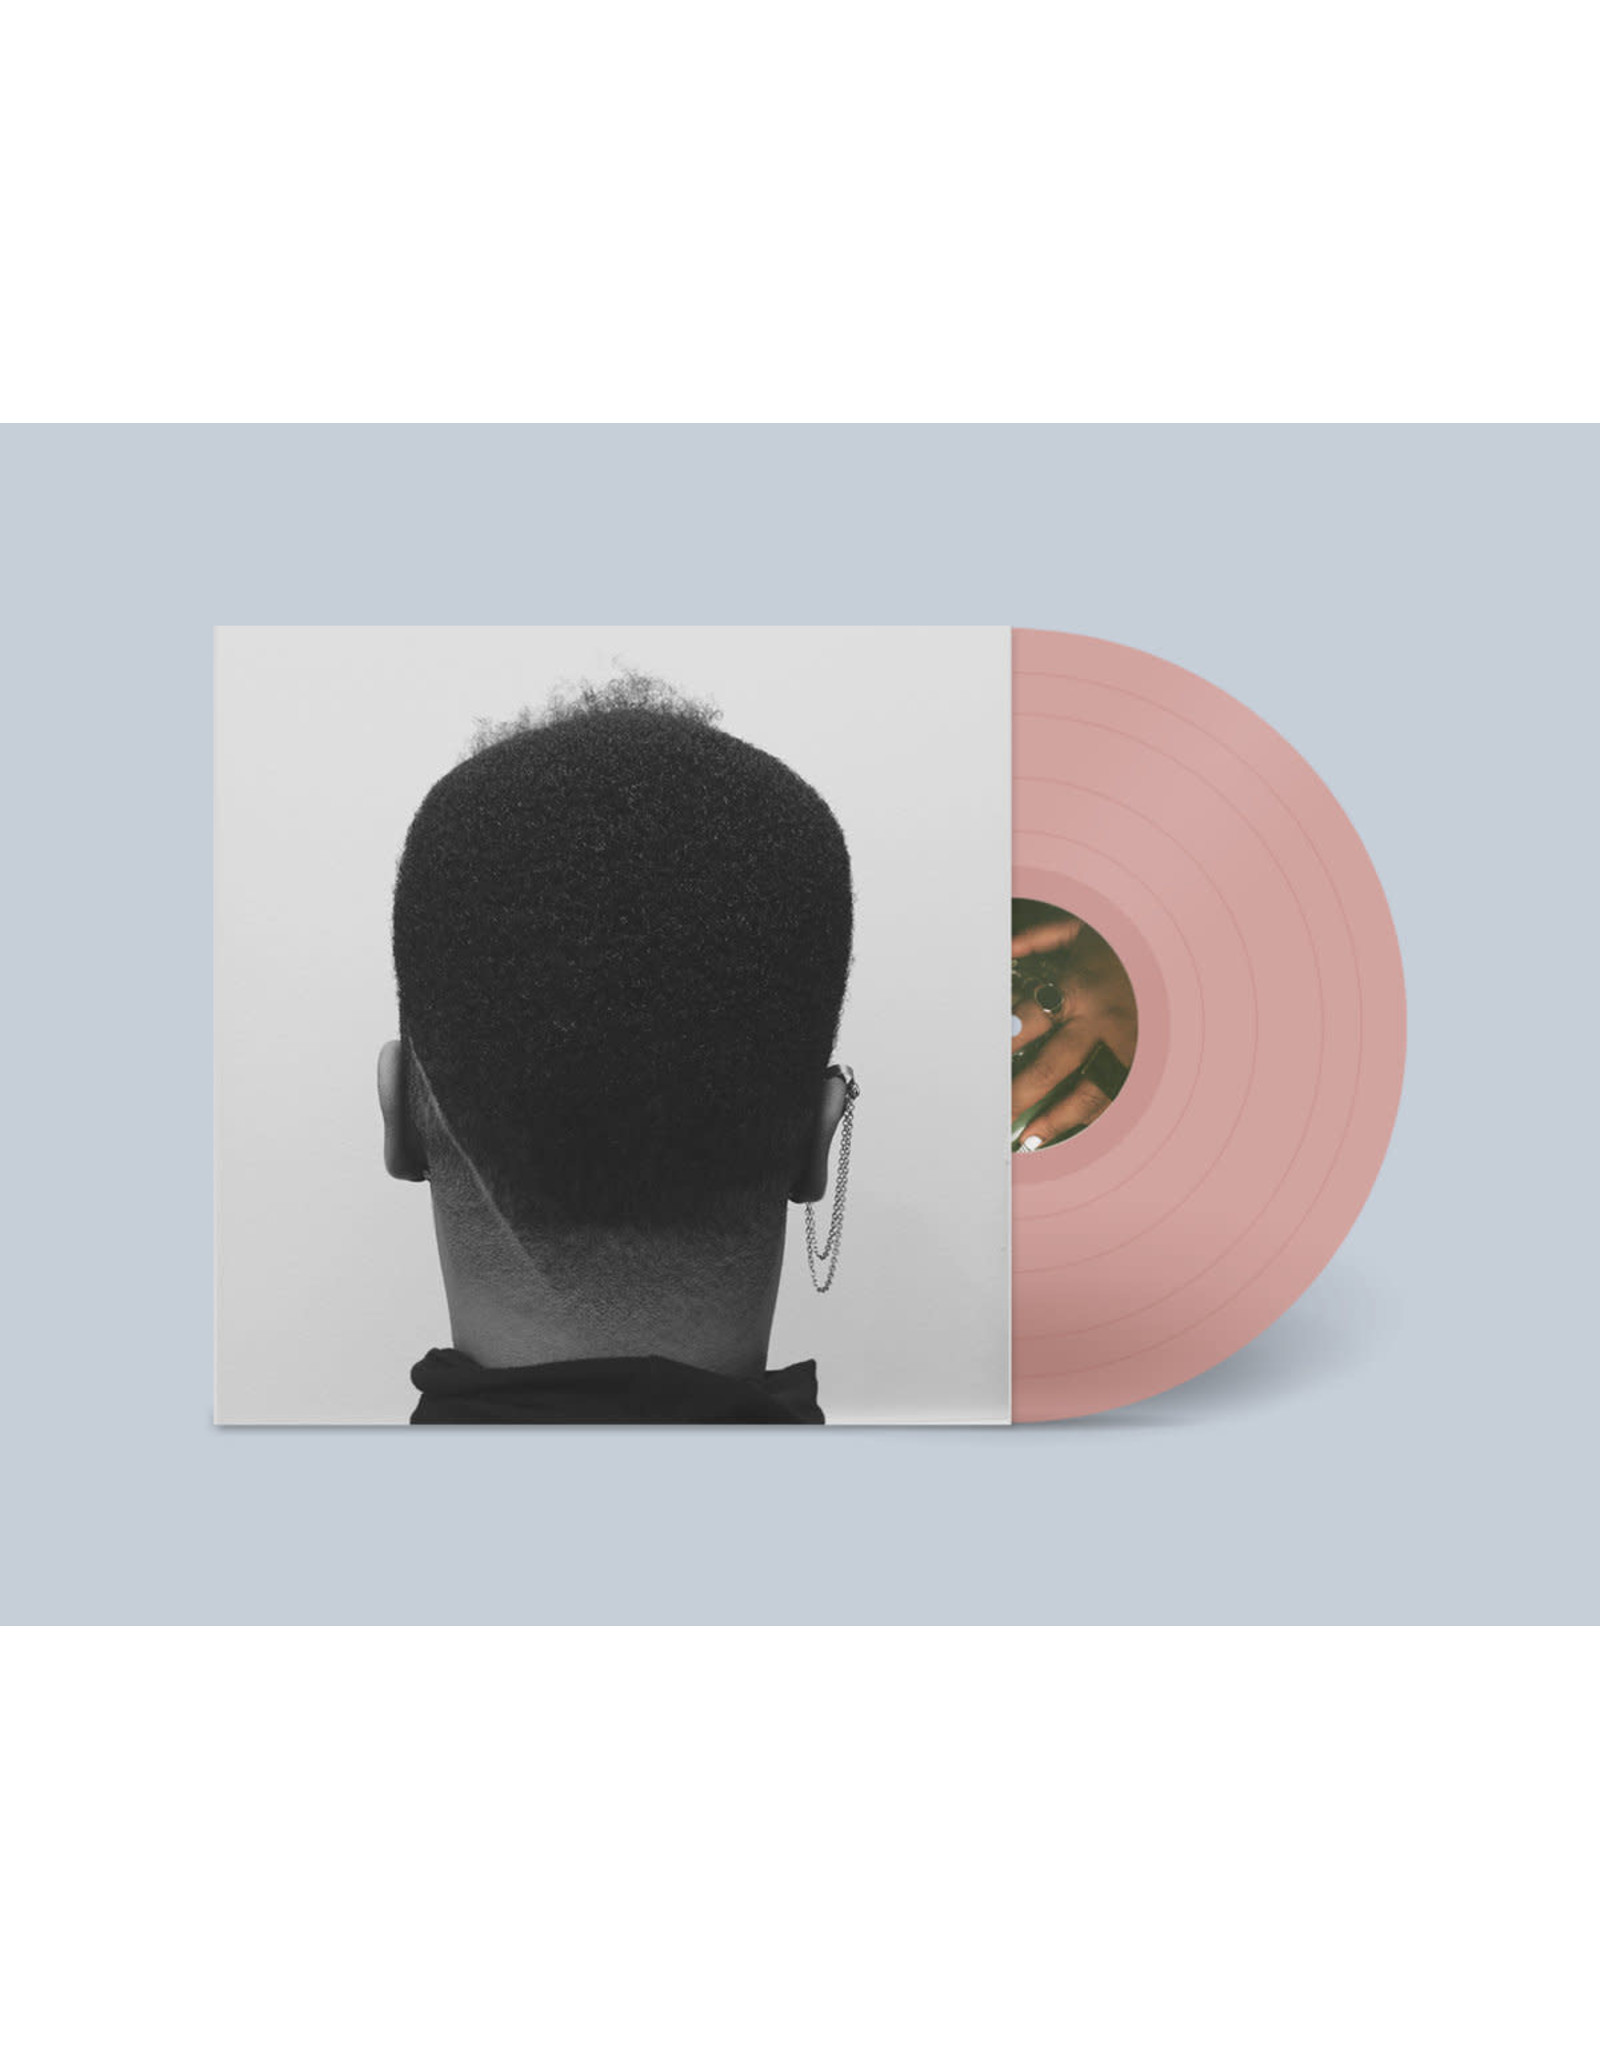 TiKA - Anywhere But Here (Exclusive Pink Vinyl)